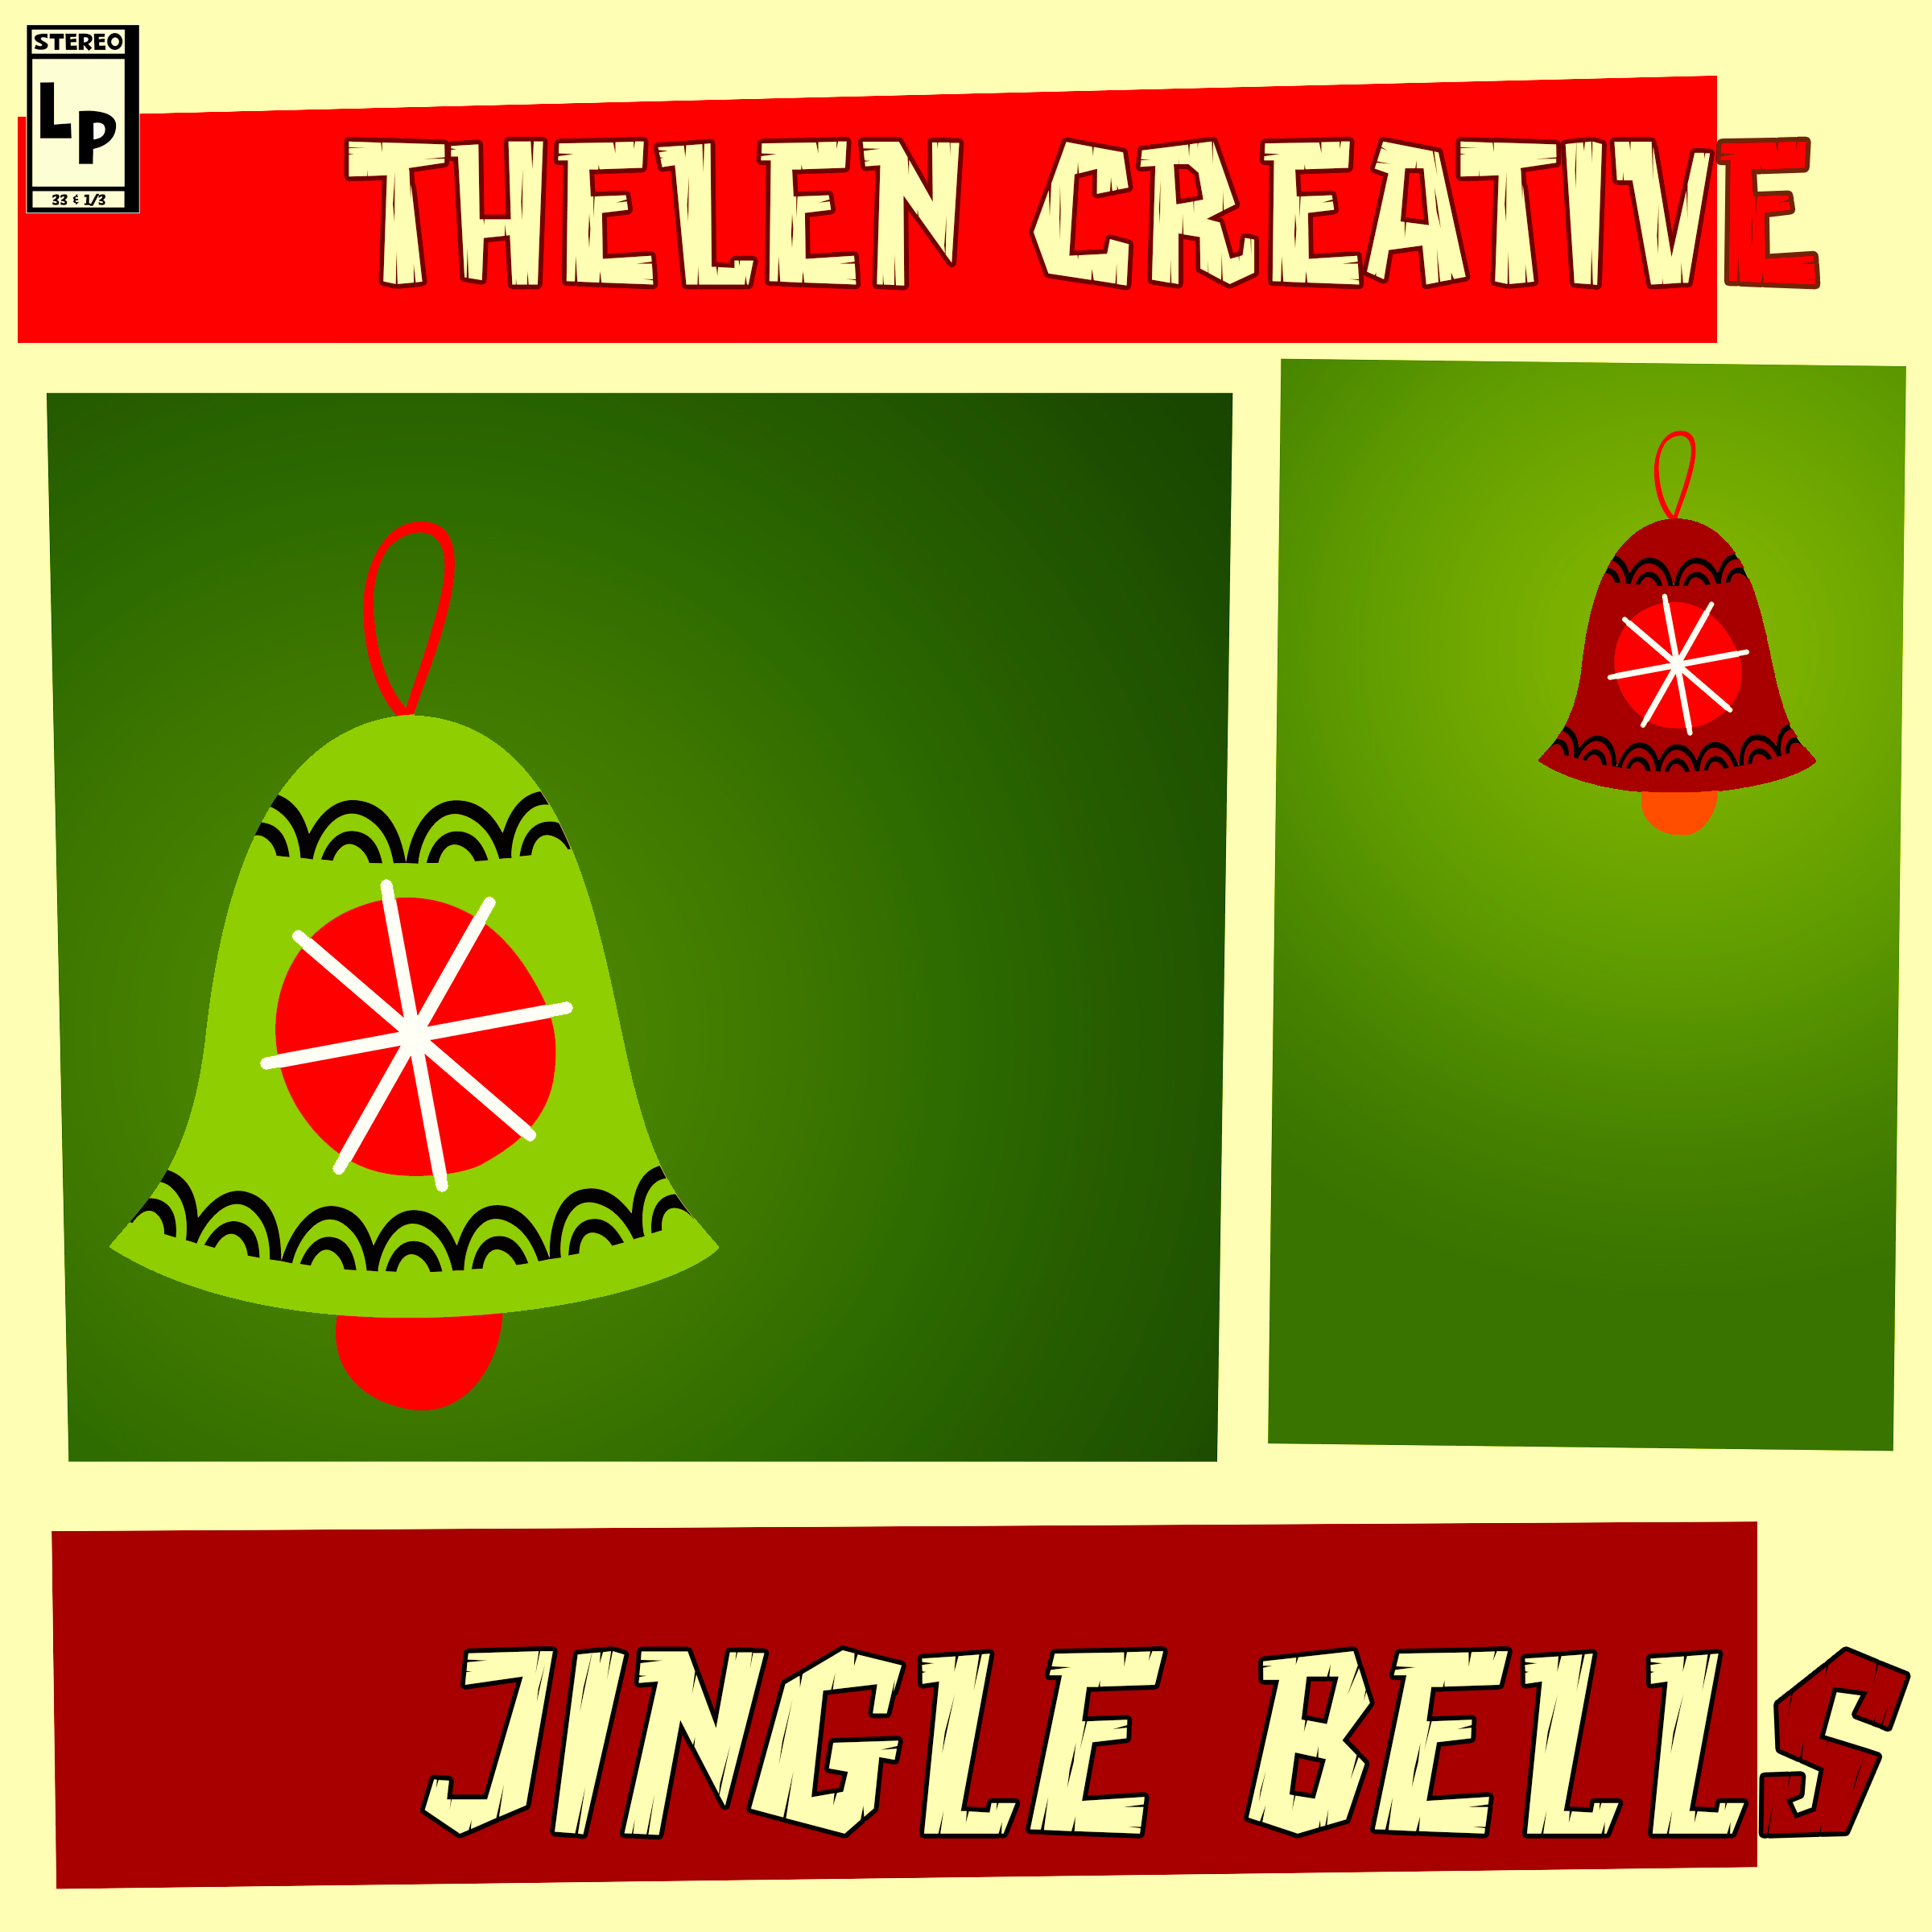 Thelen Creative Adds Some Flair To “Jingle Bells”